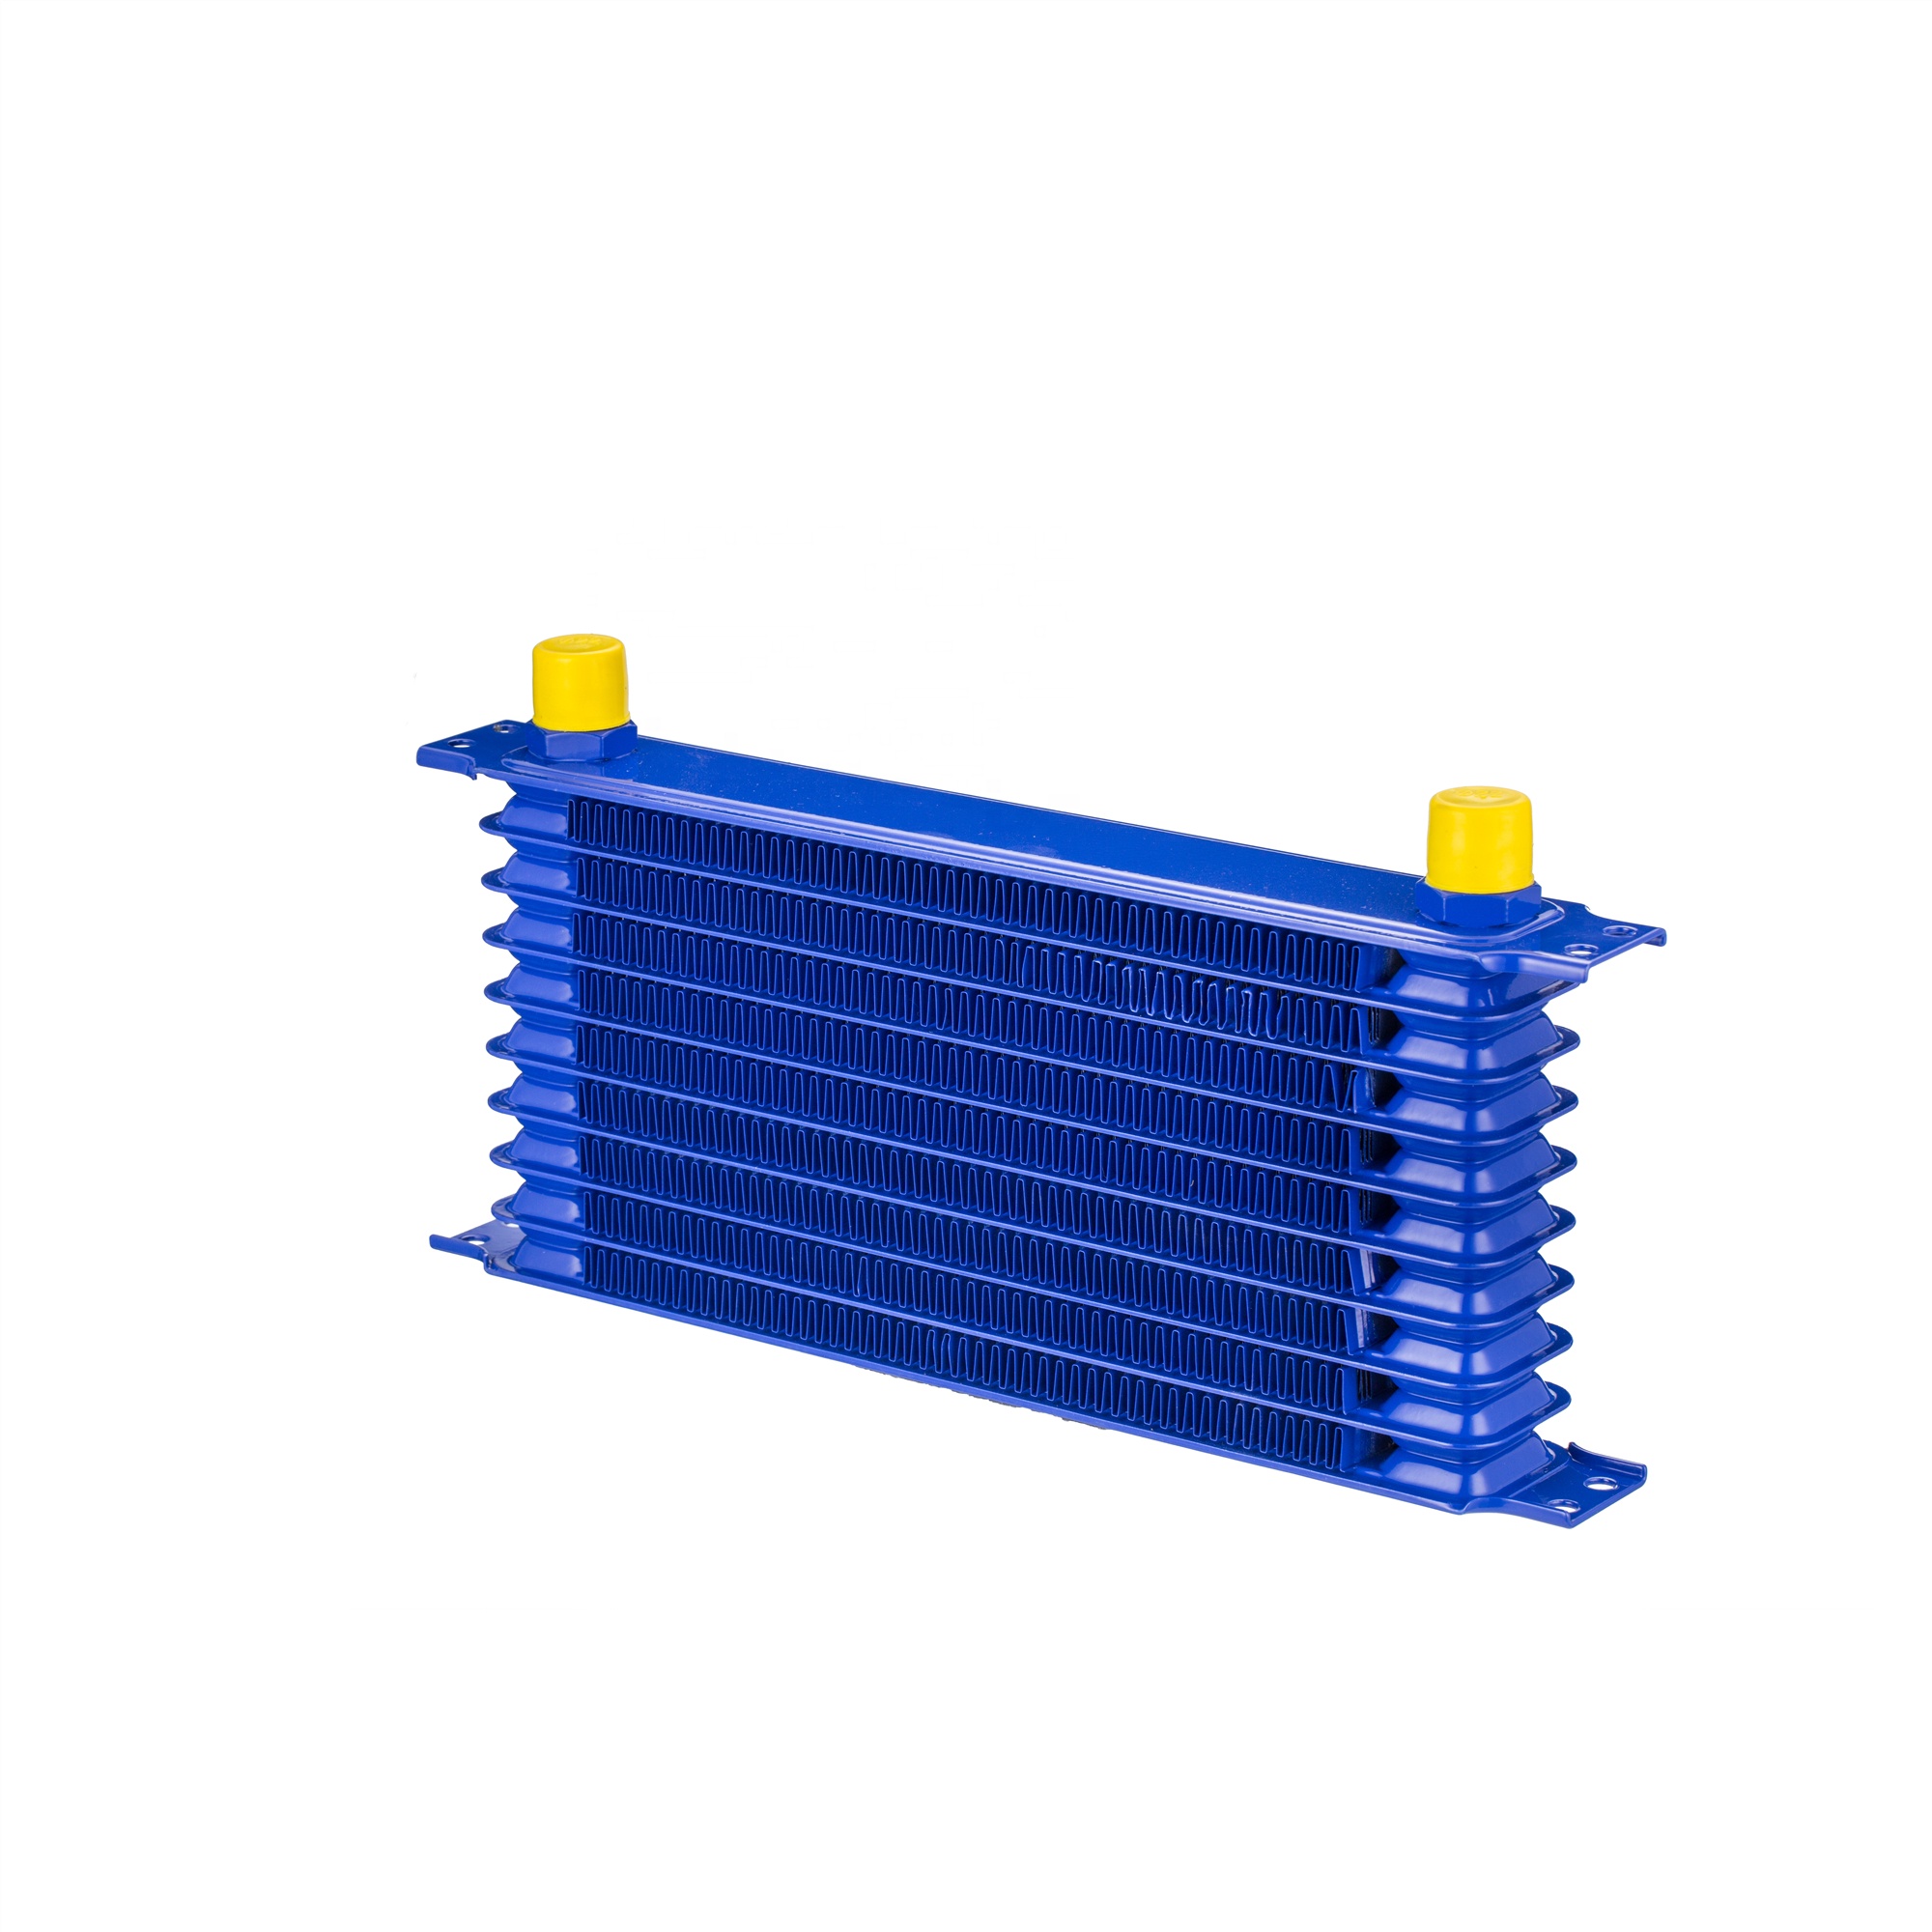 HaoFa Universal Japanese AN10 Inlet 10 Row Aluminum Transmission or Engine Oil Cooler – Blue